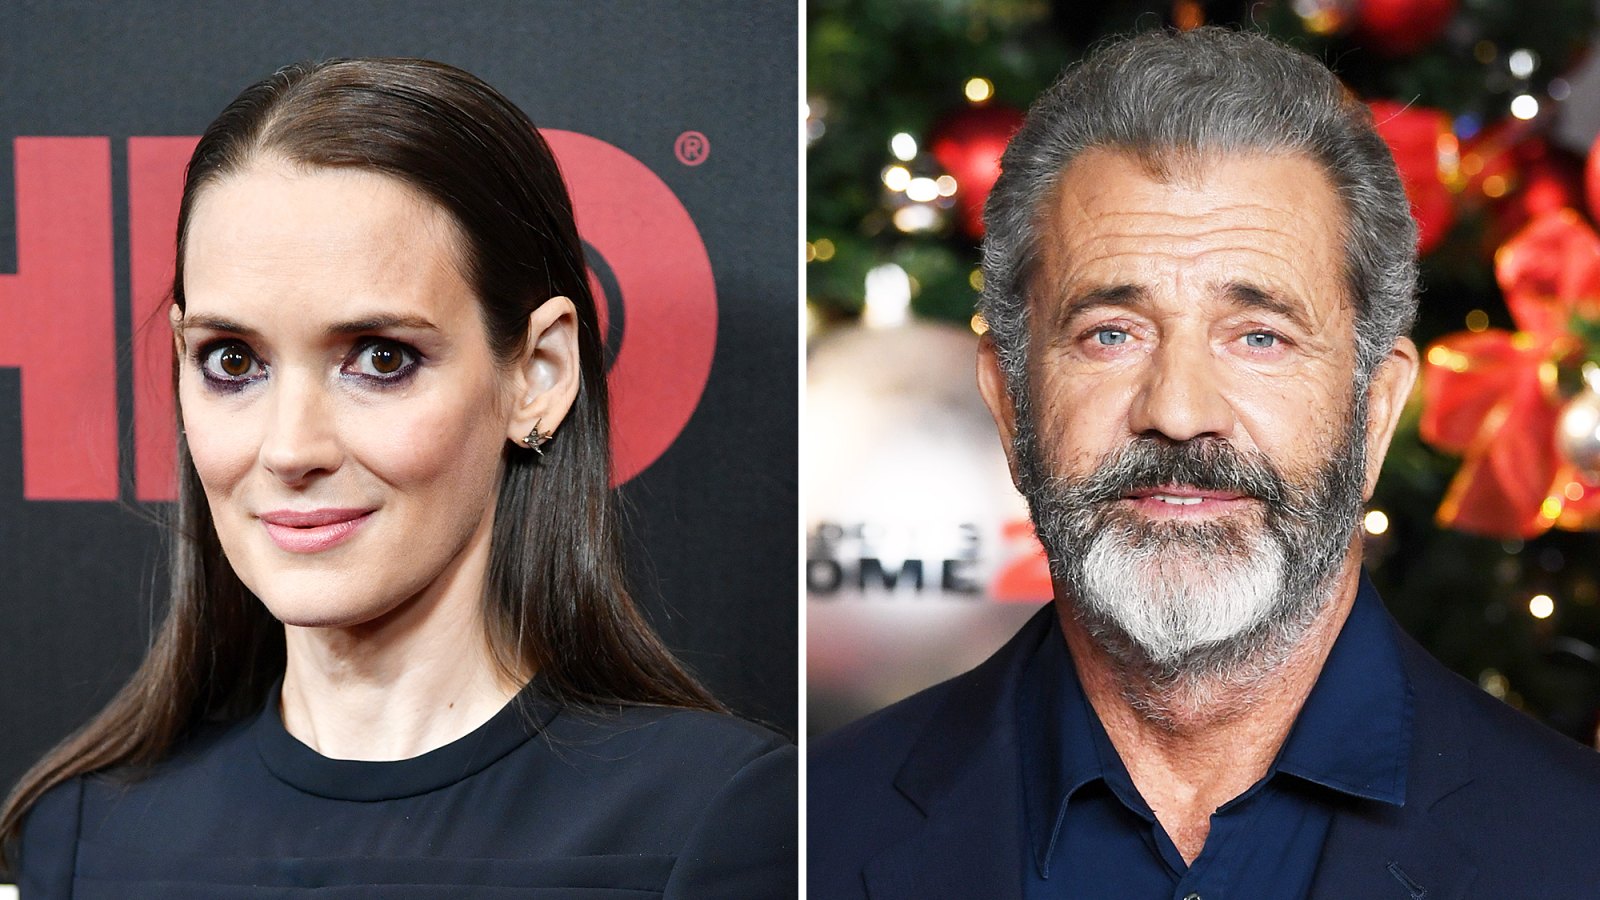 Winona Ryder Accuses Mel Gibson of Making Anti-Semitic and Homophobic Comments in the Past